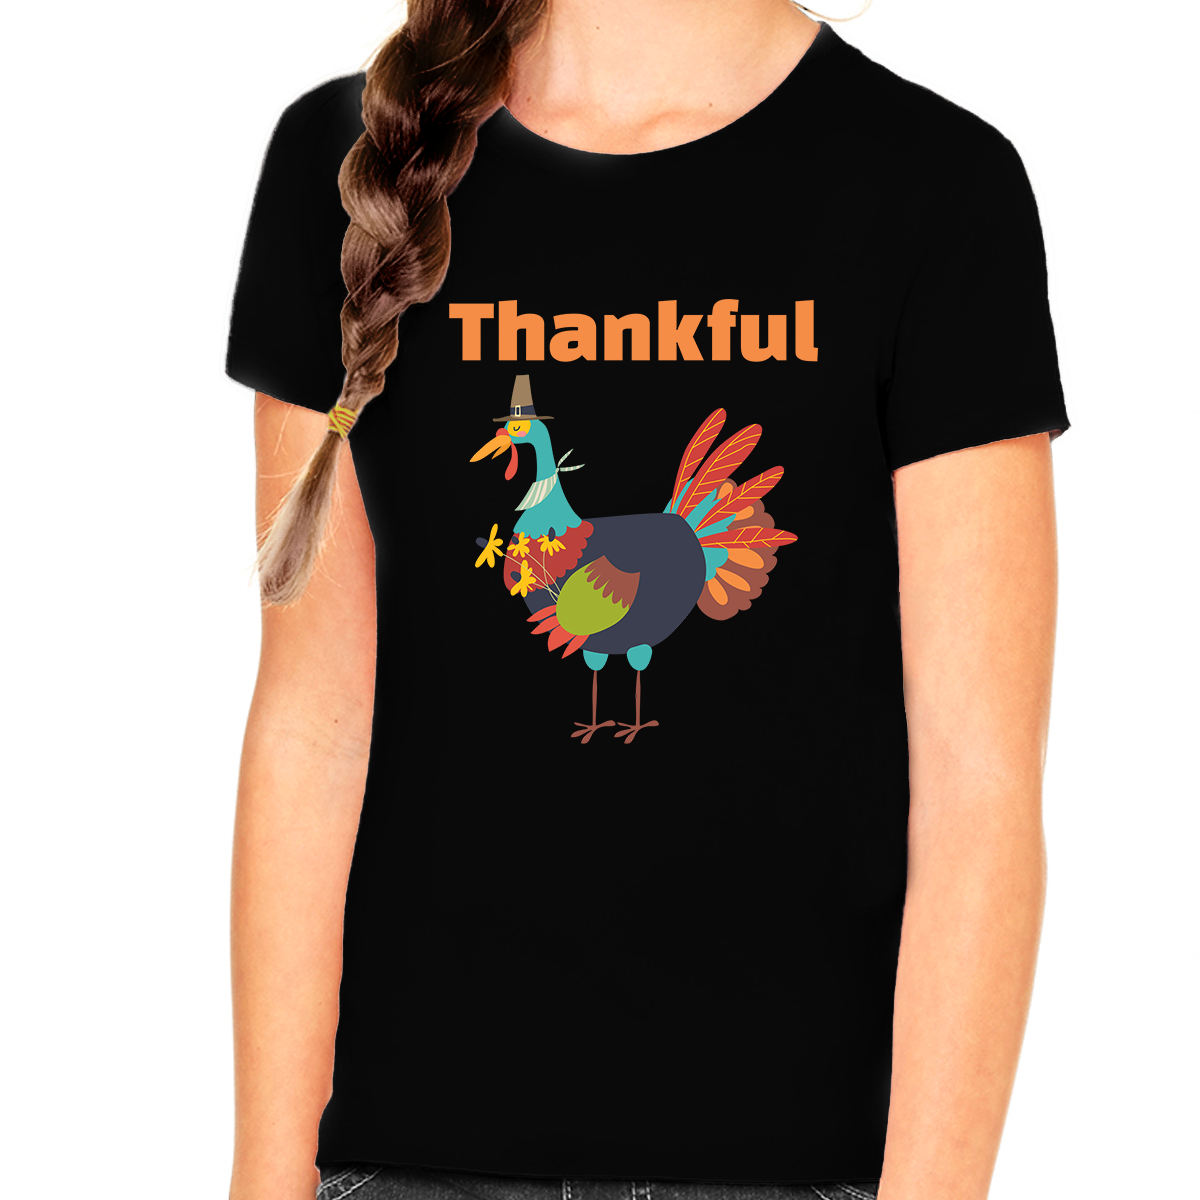 Funny Thanksgiving Shirts for Girls Fall Clothes for Kids Cute Fall Tops for Girls Cute Turkey Shirt for Kid